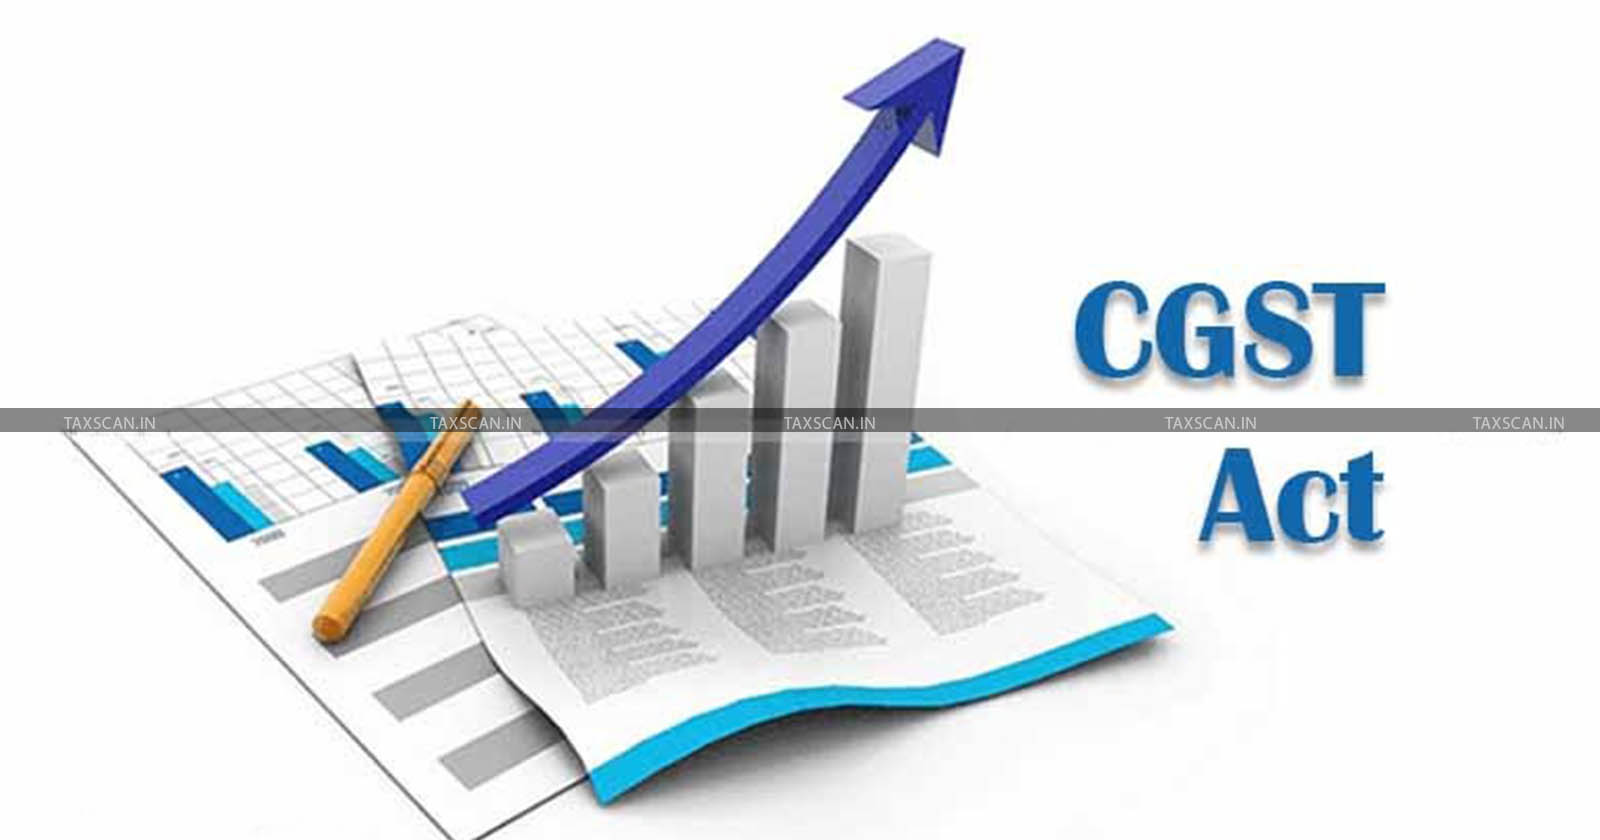 Delhi High Court - Central Goods and Service Tax - CGST Act - TAXSCAN